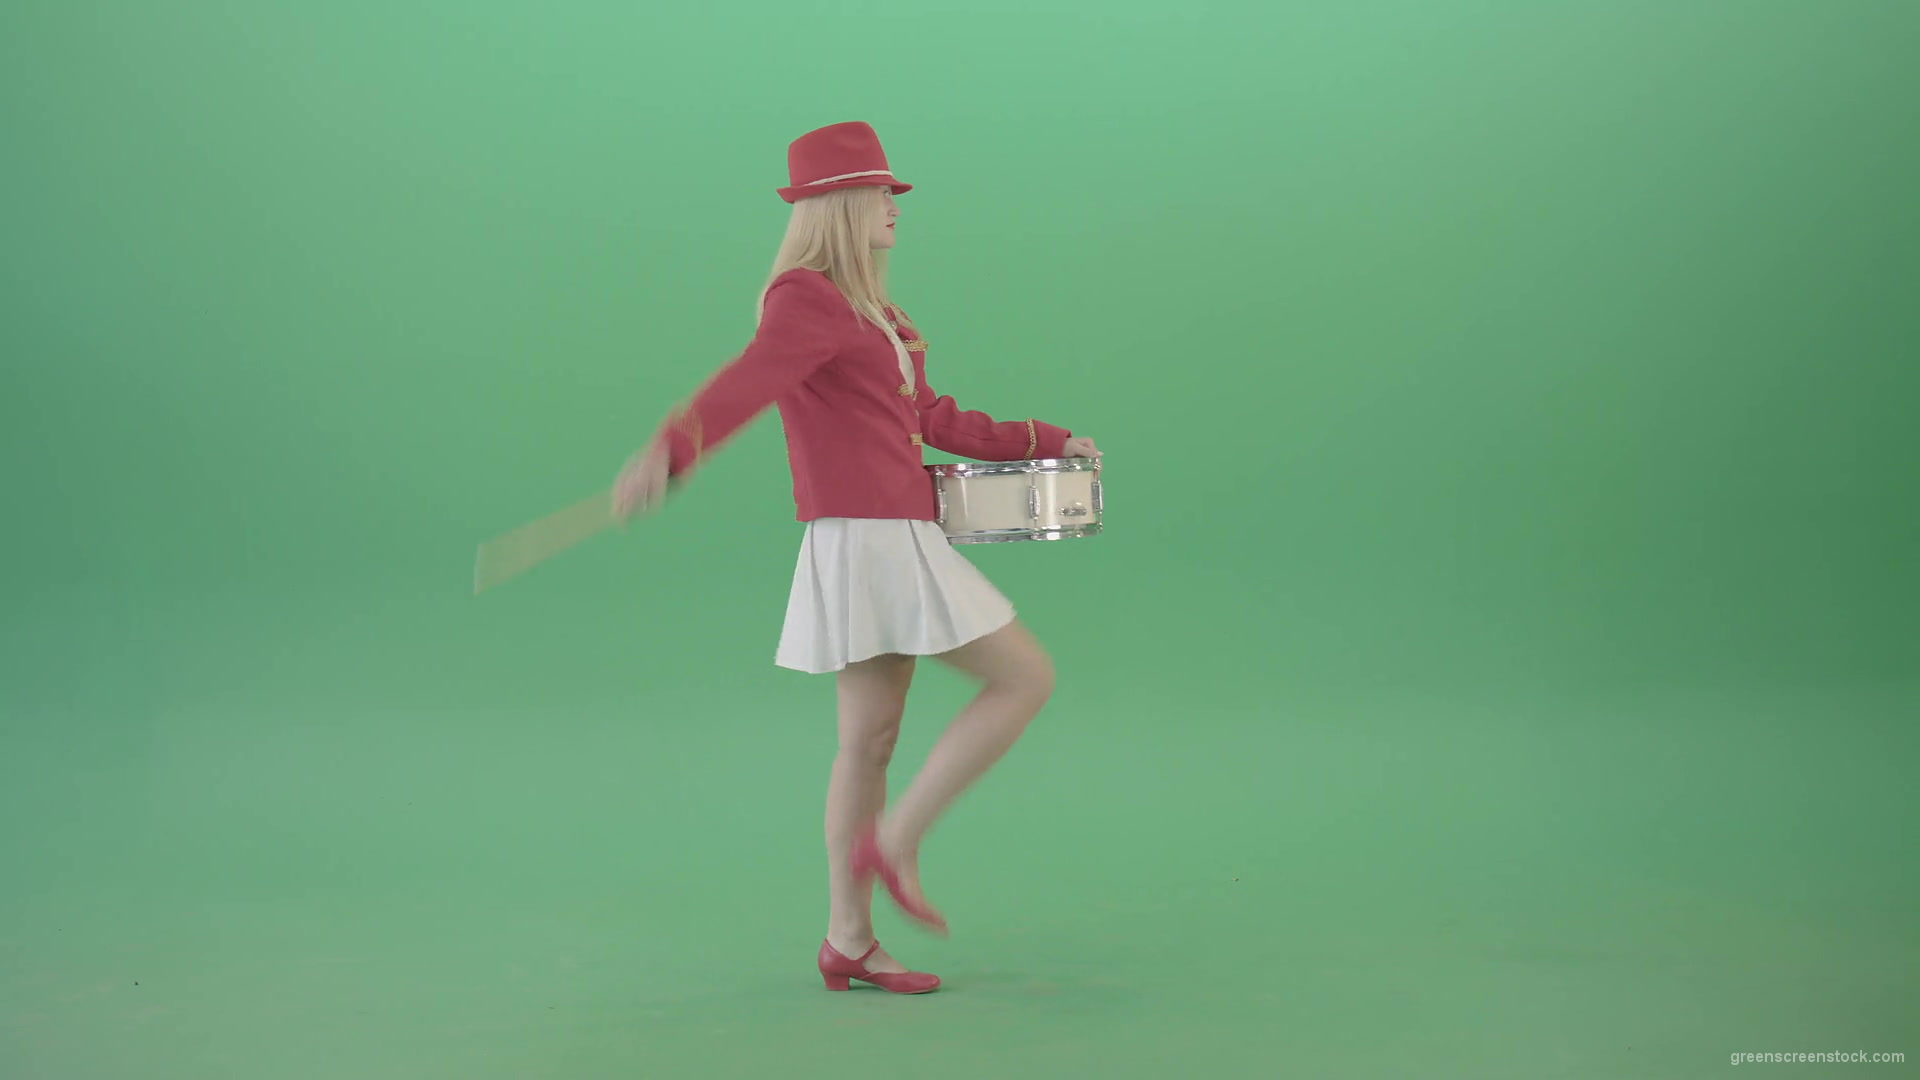 Side-view-marching-girl-play-white-snare-drum-in-red-uniform-on-green-screen-Video-Footage-1920_006 Green Screen Stock